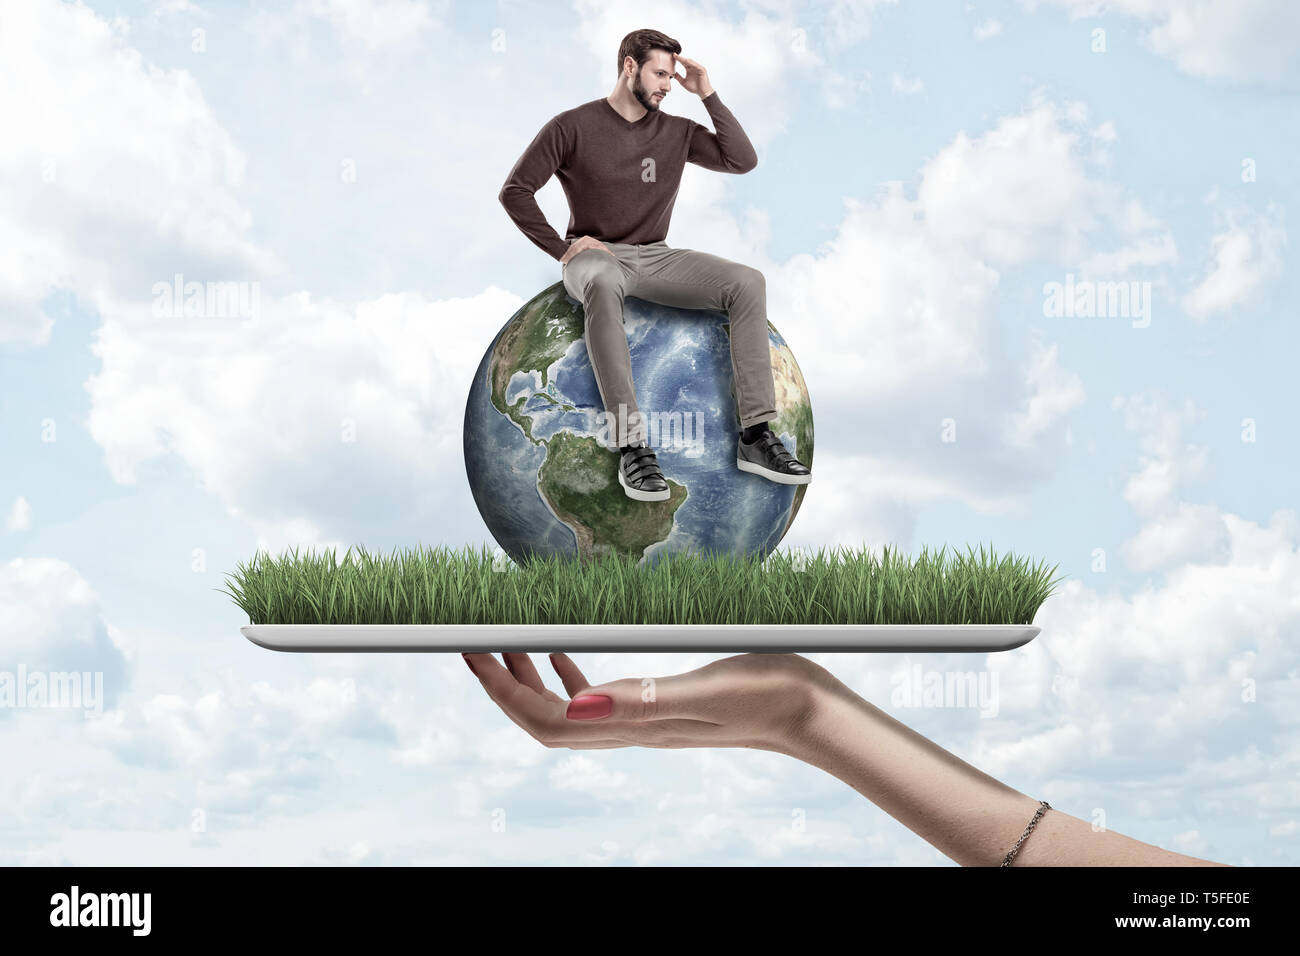 Female hand holding small man in casual clothes sitting on earth globe on green grass model with blue sky background Stock Photo